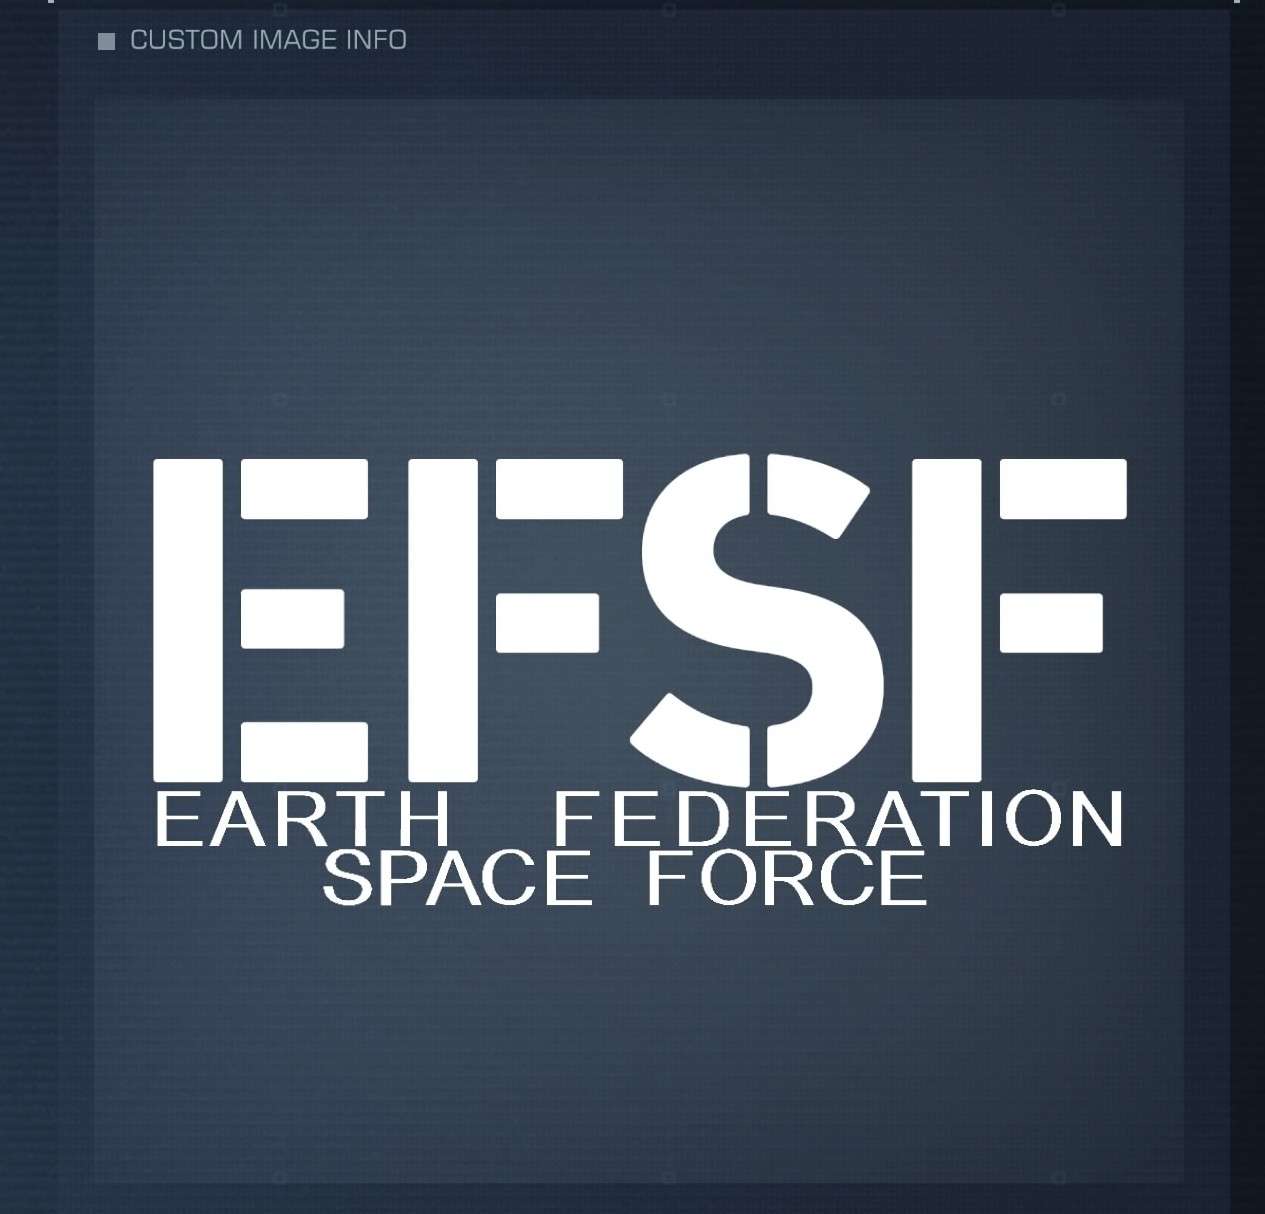 Earth Federation Space Force Identification Mark